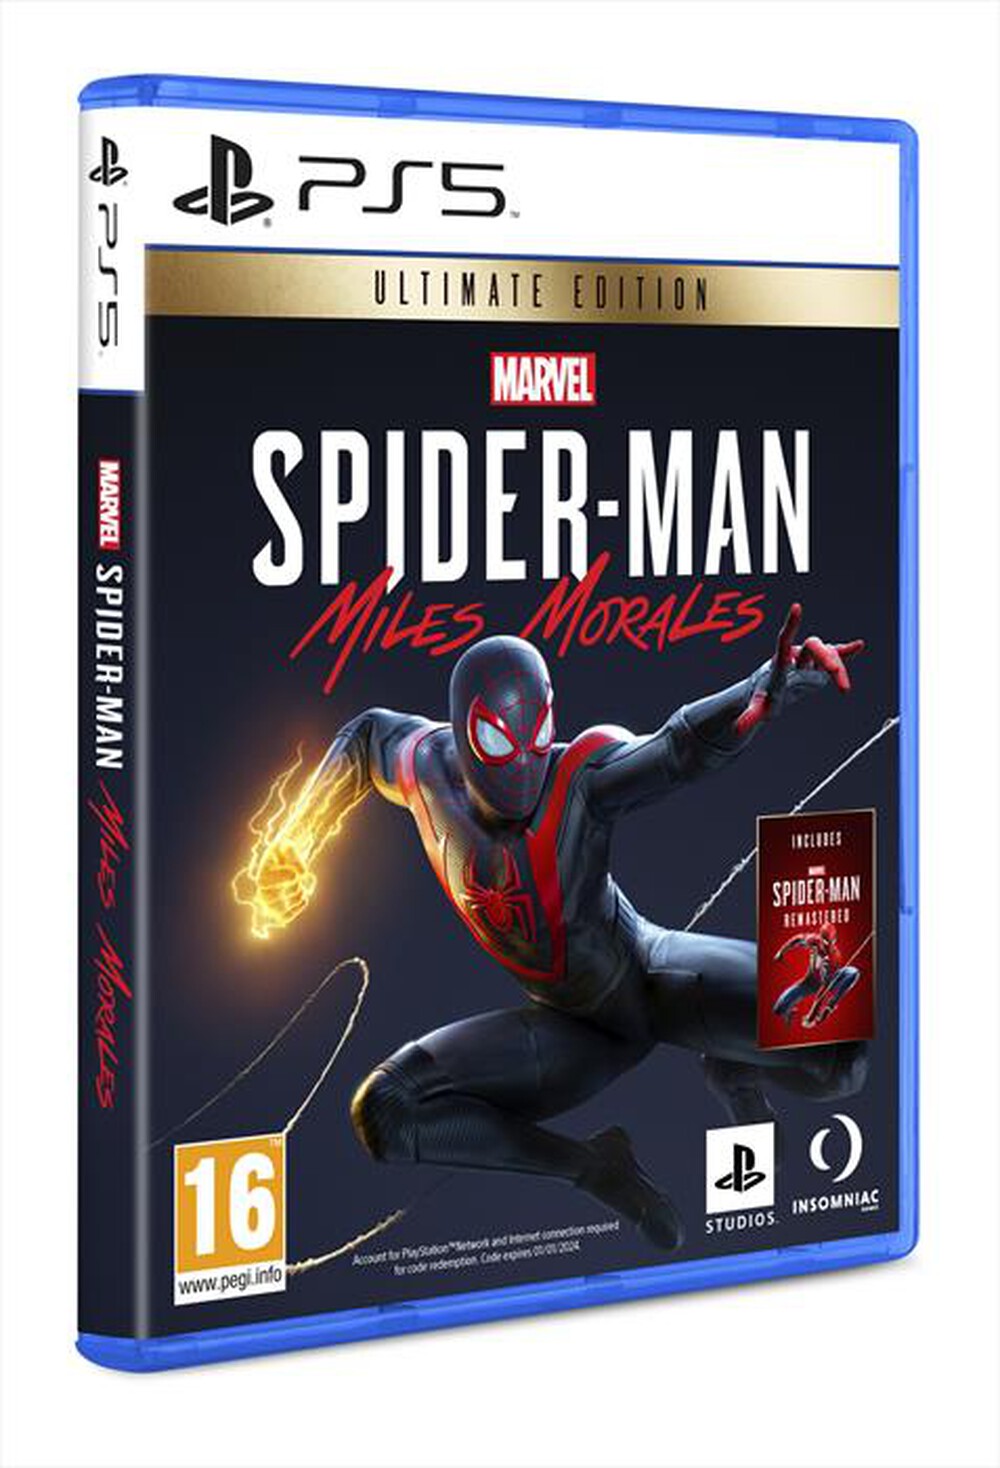 "SONY COMPUTER - MARVEL'S SPIDER-MAN MILES MORALES ULTIMATE ED-PS5"